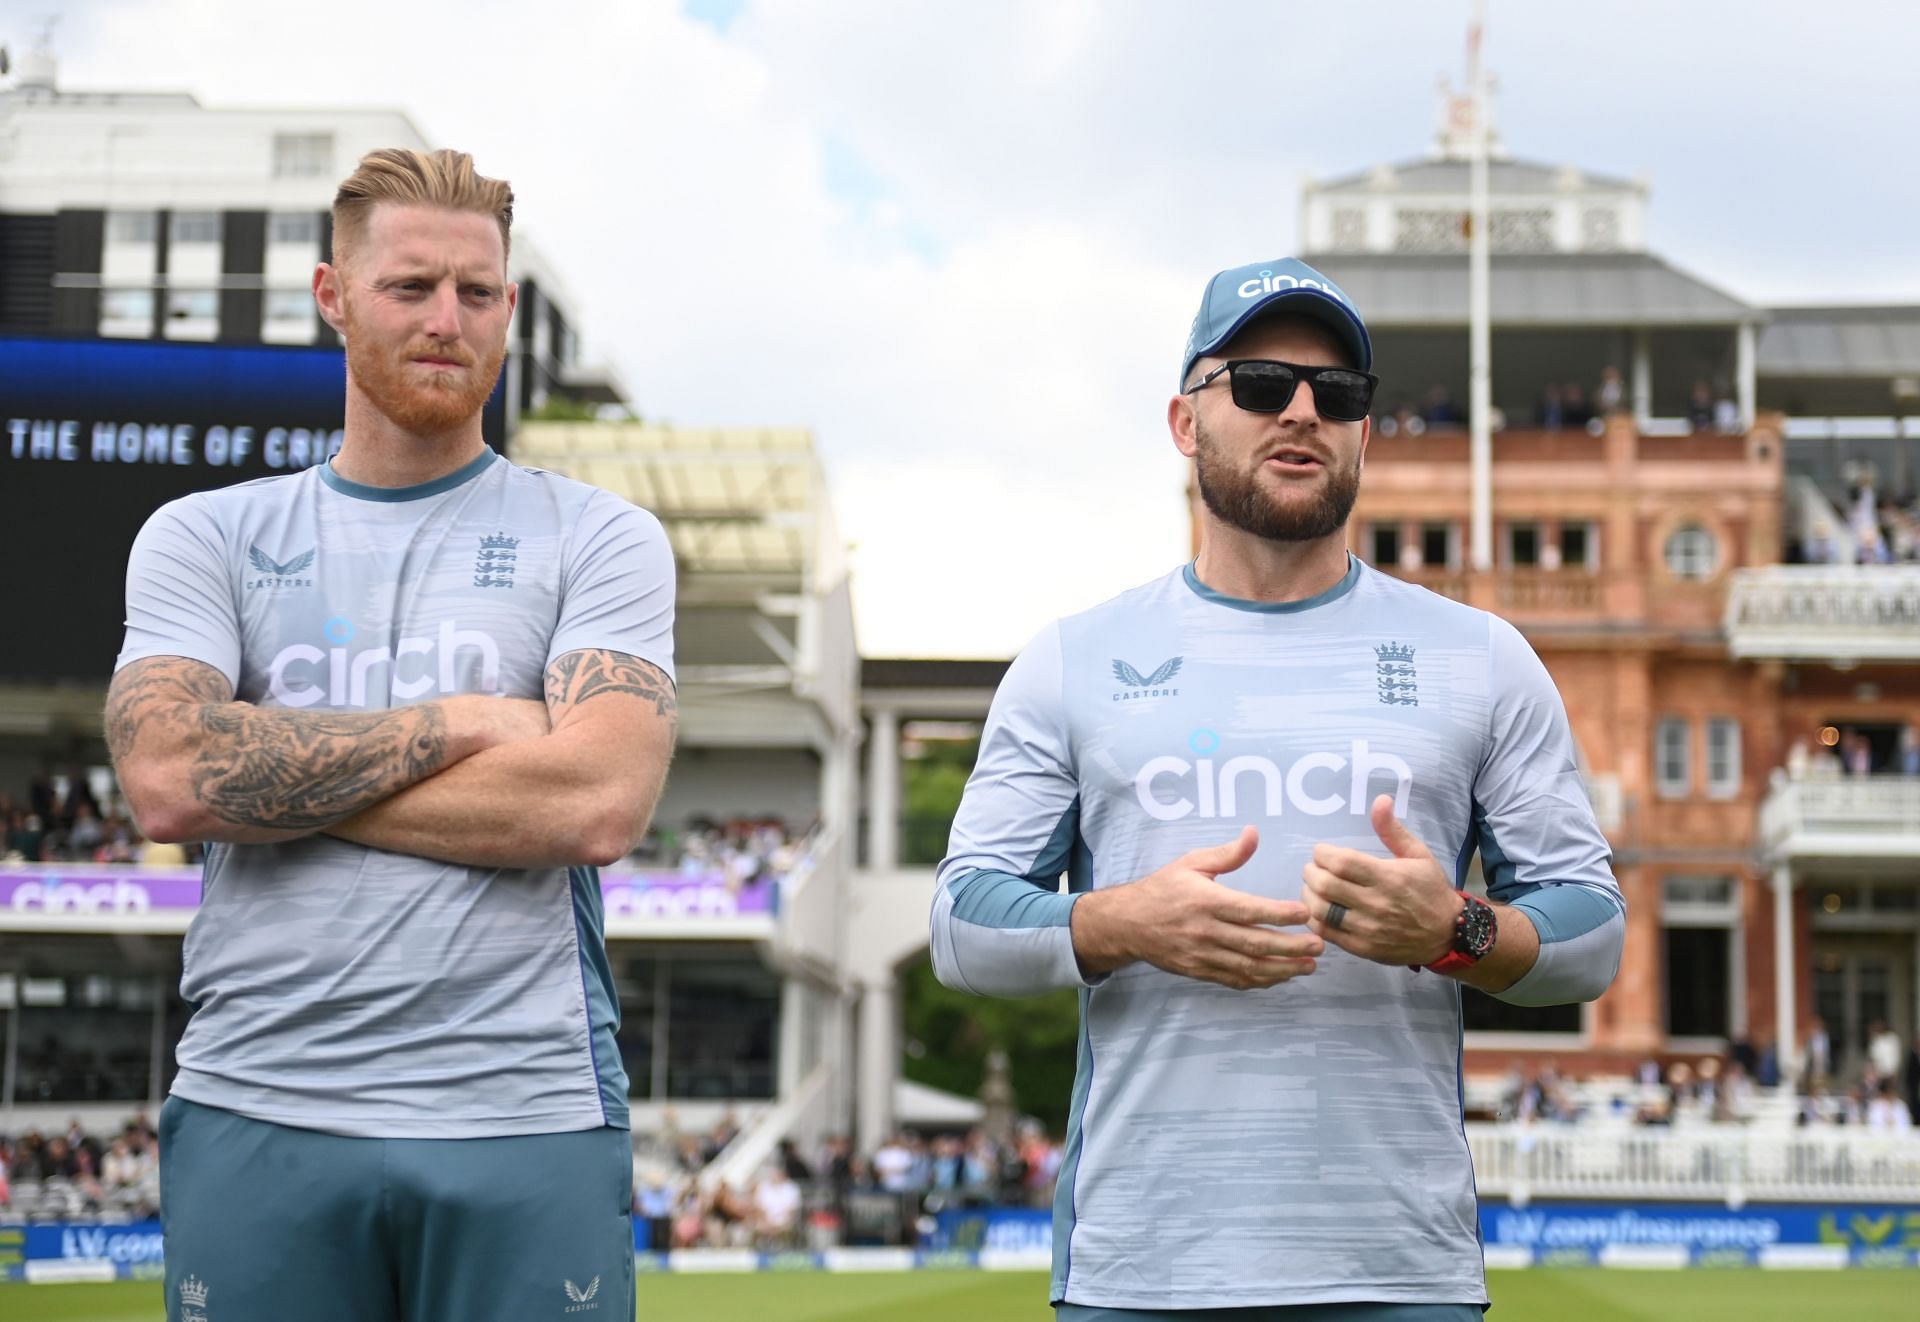 Ben Stokes and Brendon McCullum. (Credits: Getty)